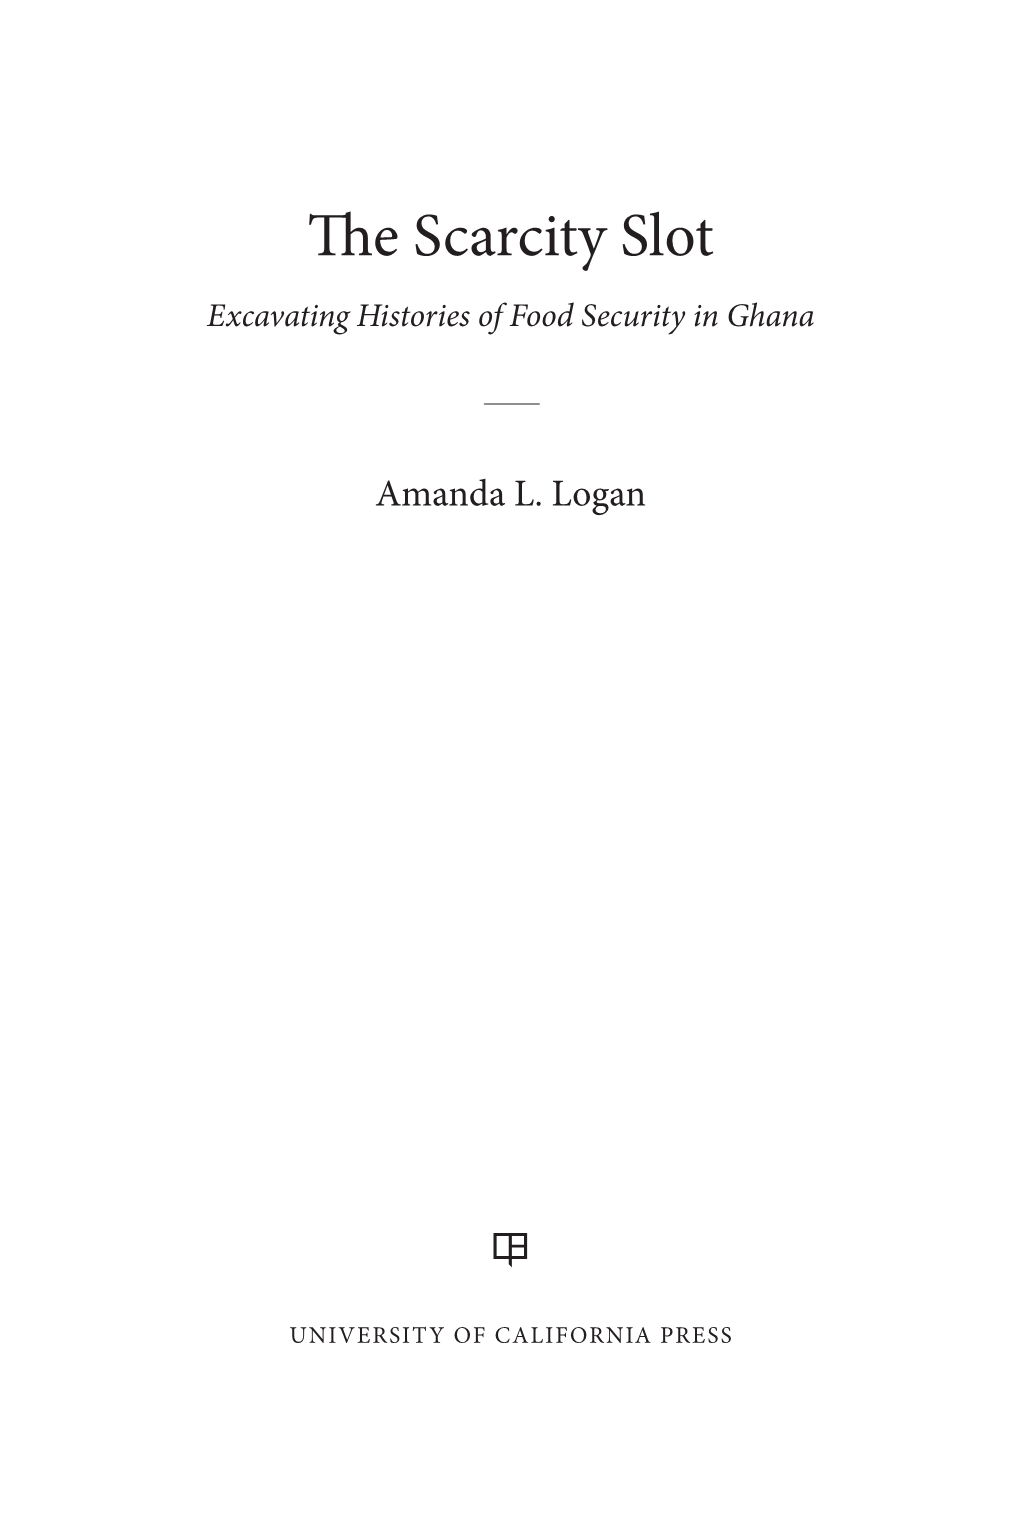 The Scarcity Slot Excavating Histories of Food Security in Ghana